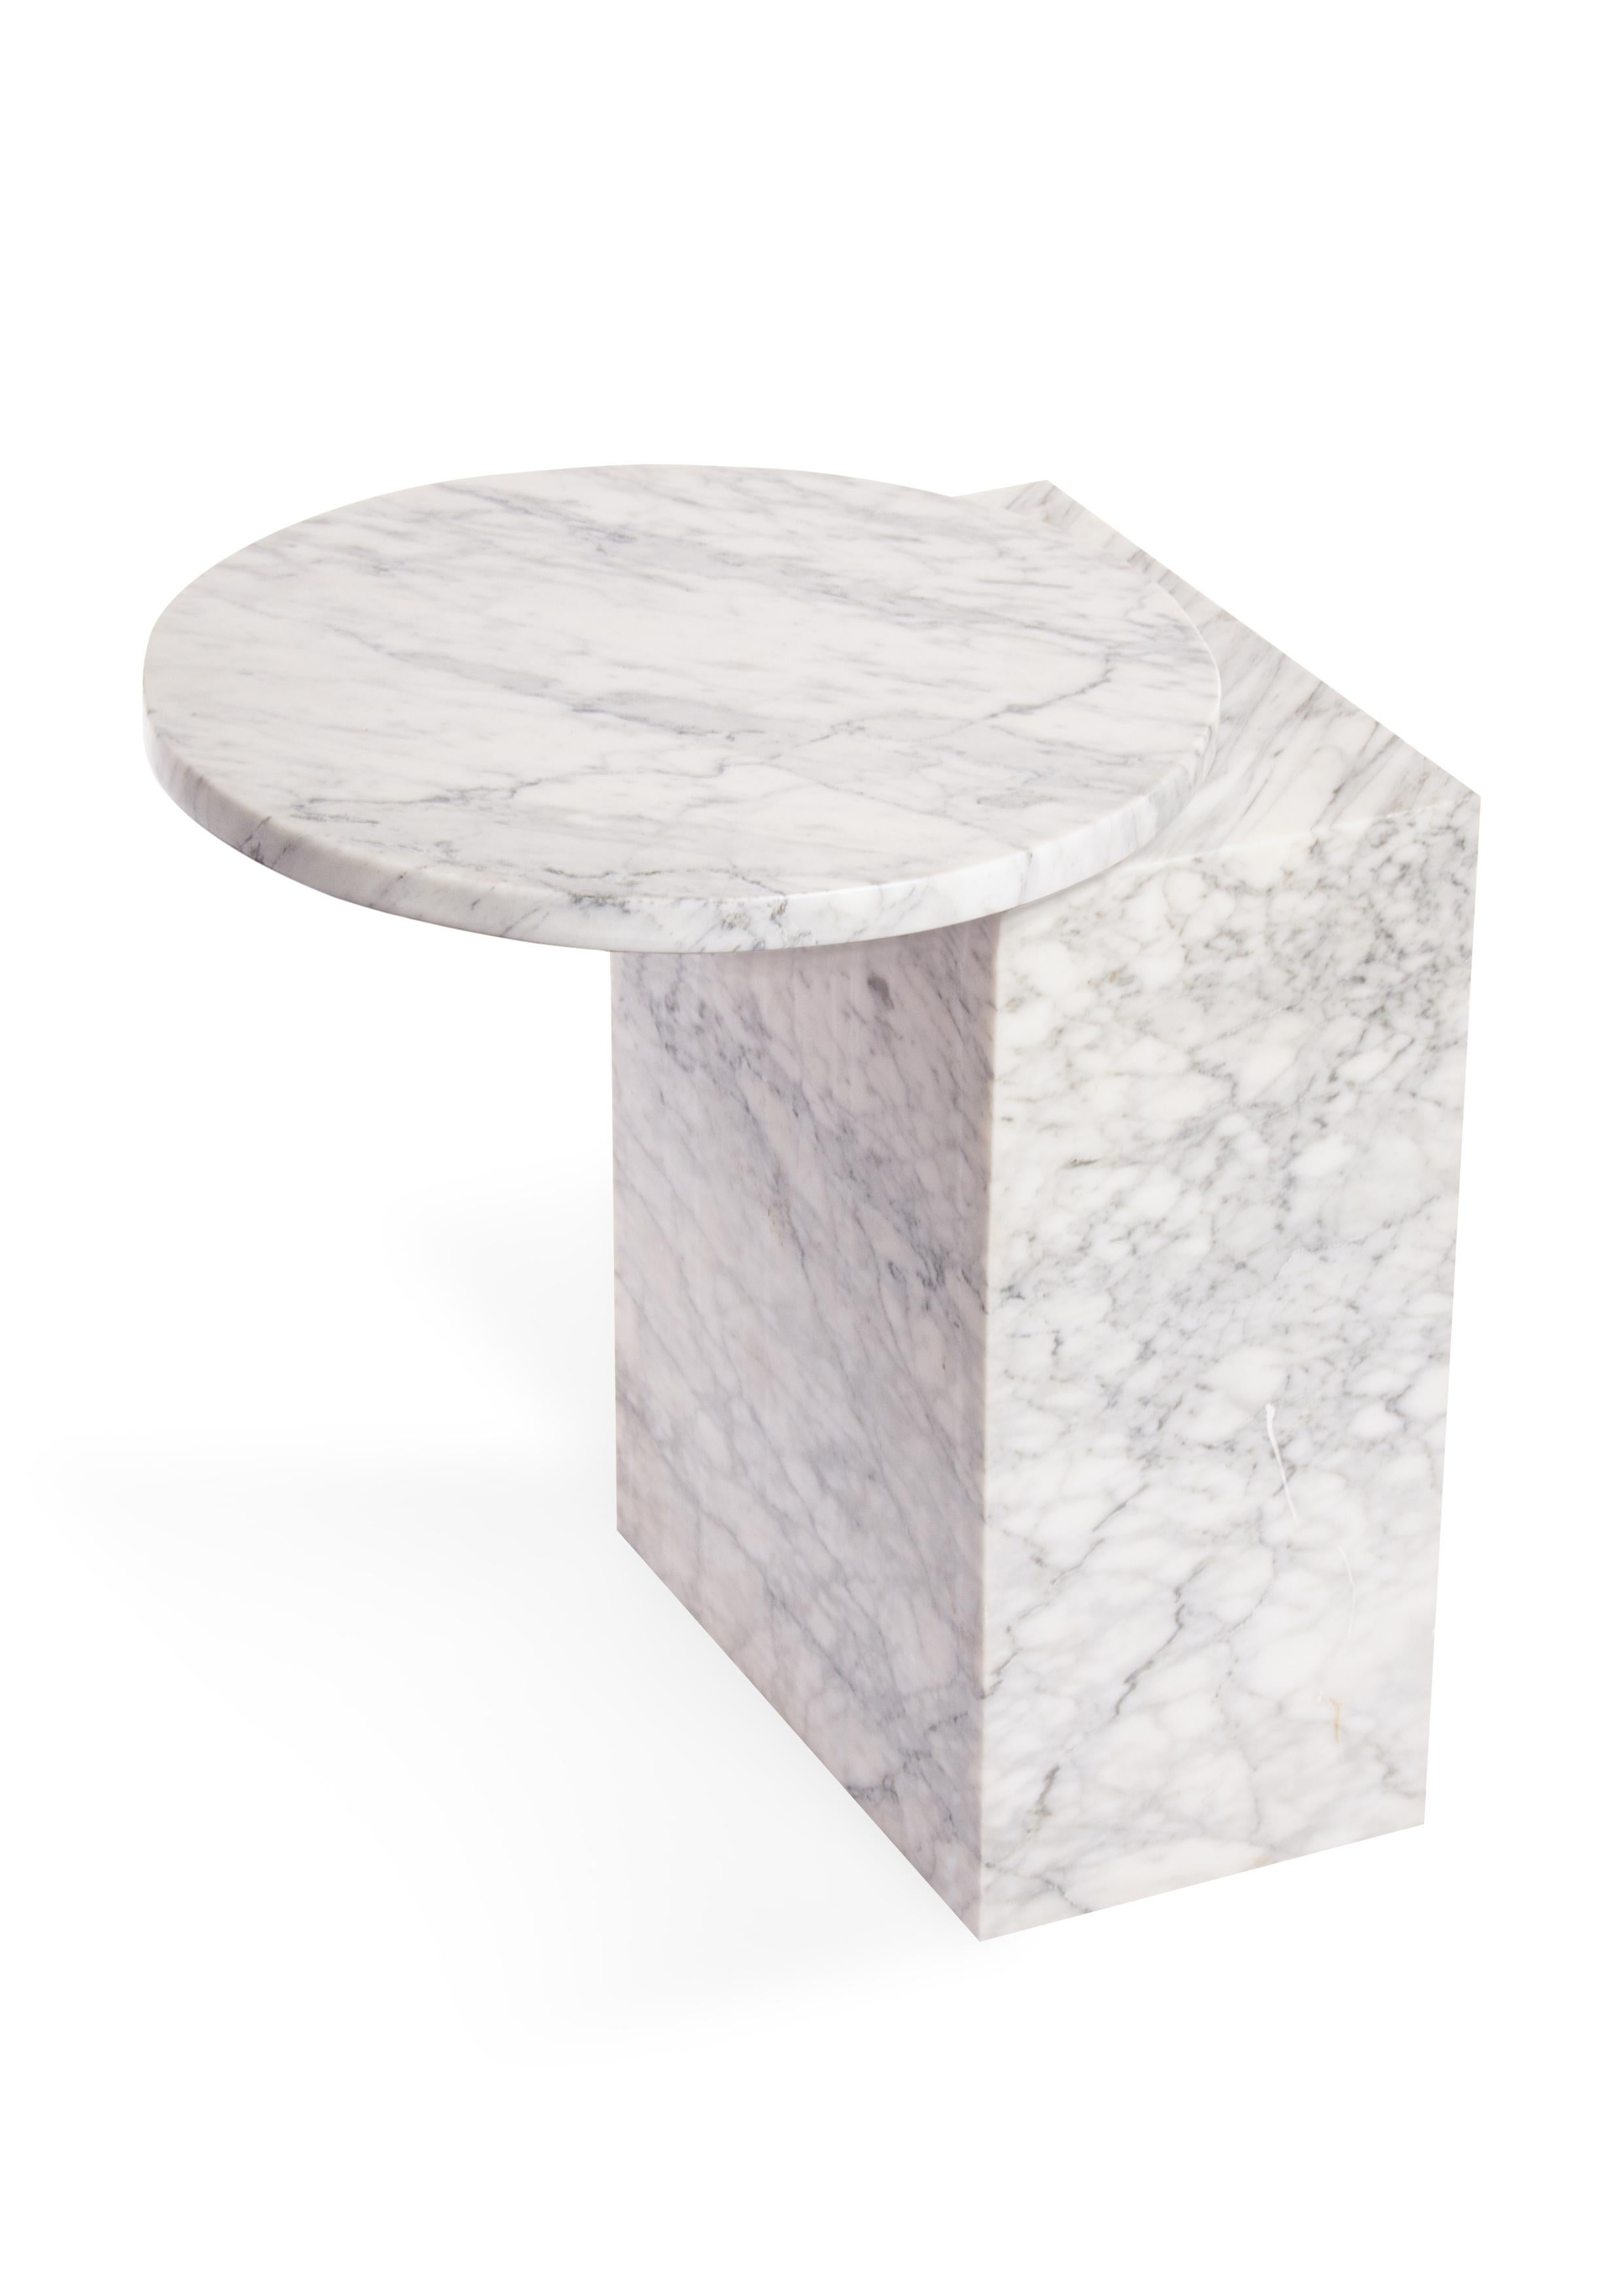 Stainless Steel Configurable Geometry II Side Table by Sten Studio, REP by Tuleste Factory